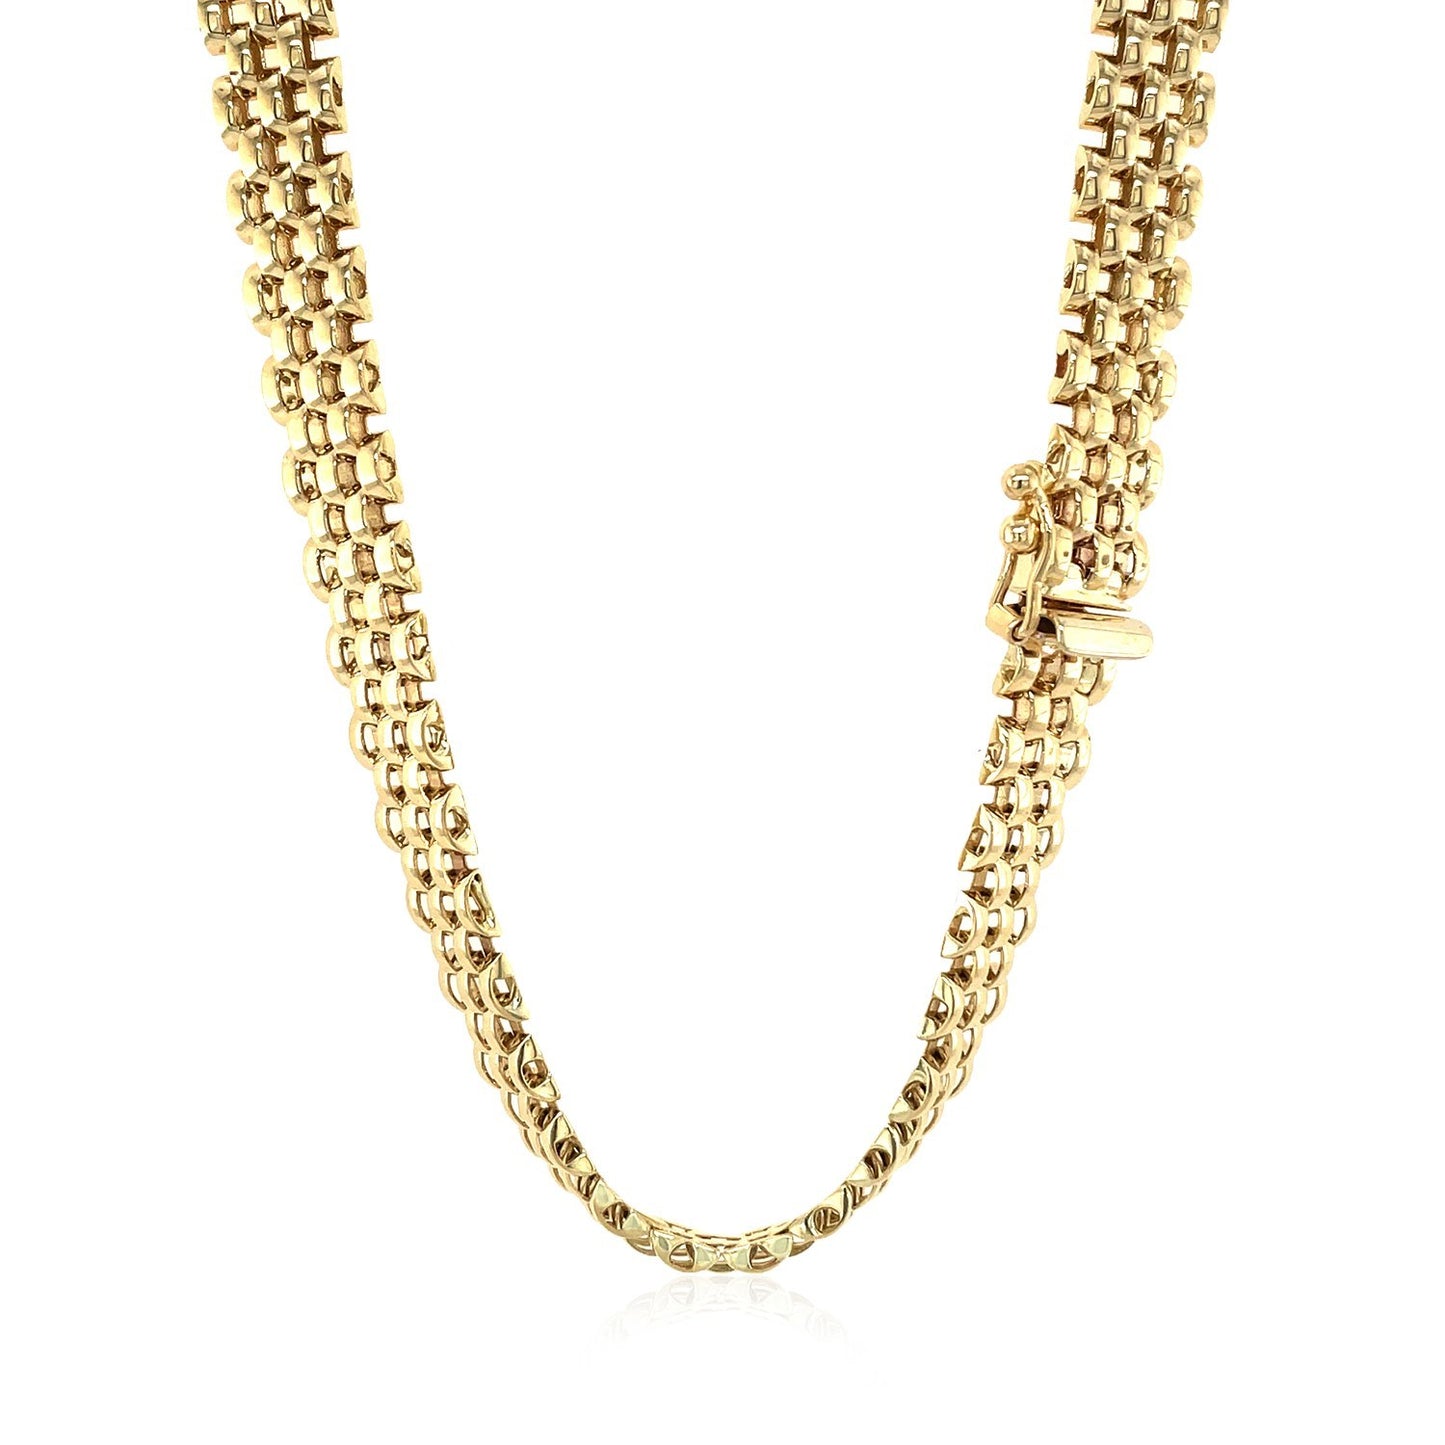 14k Yellow Gold Polished Multi-Row Panther Link Necklace